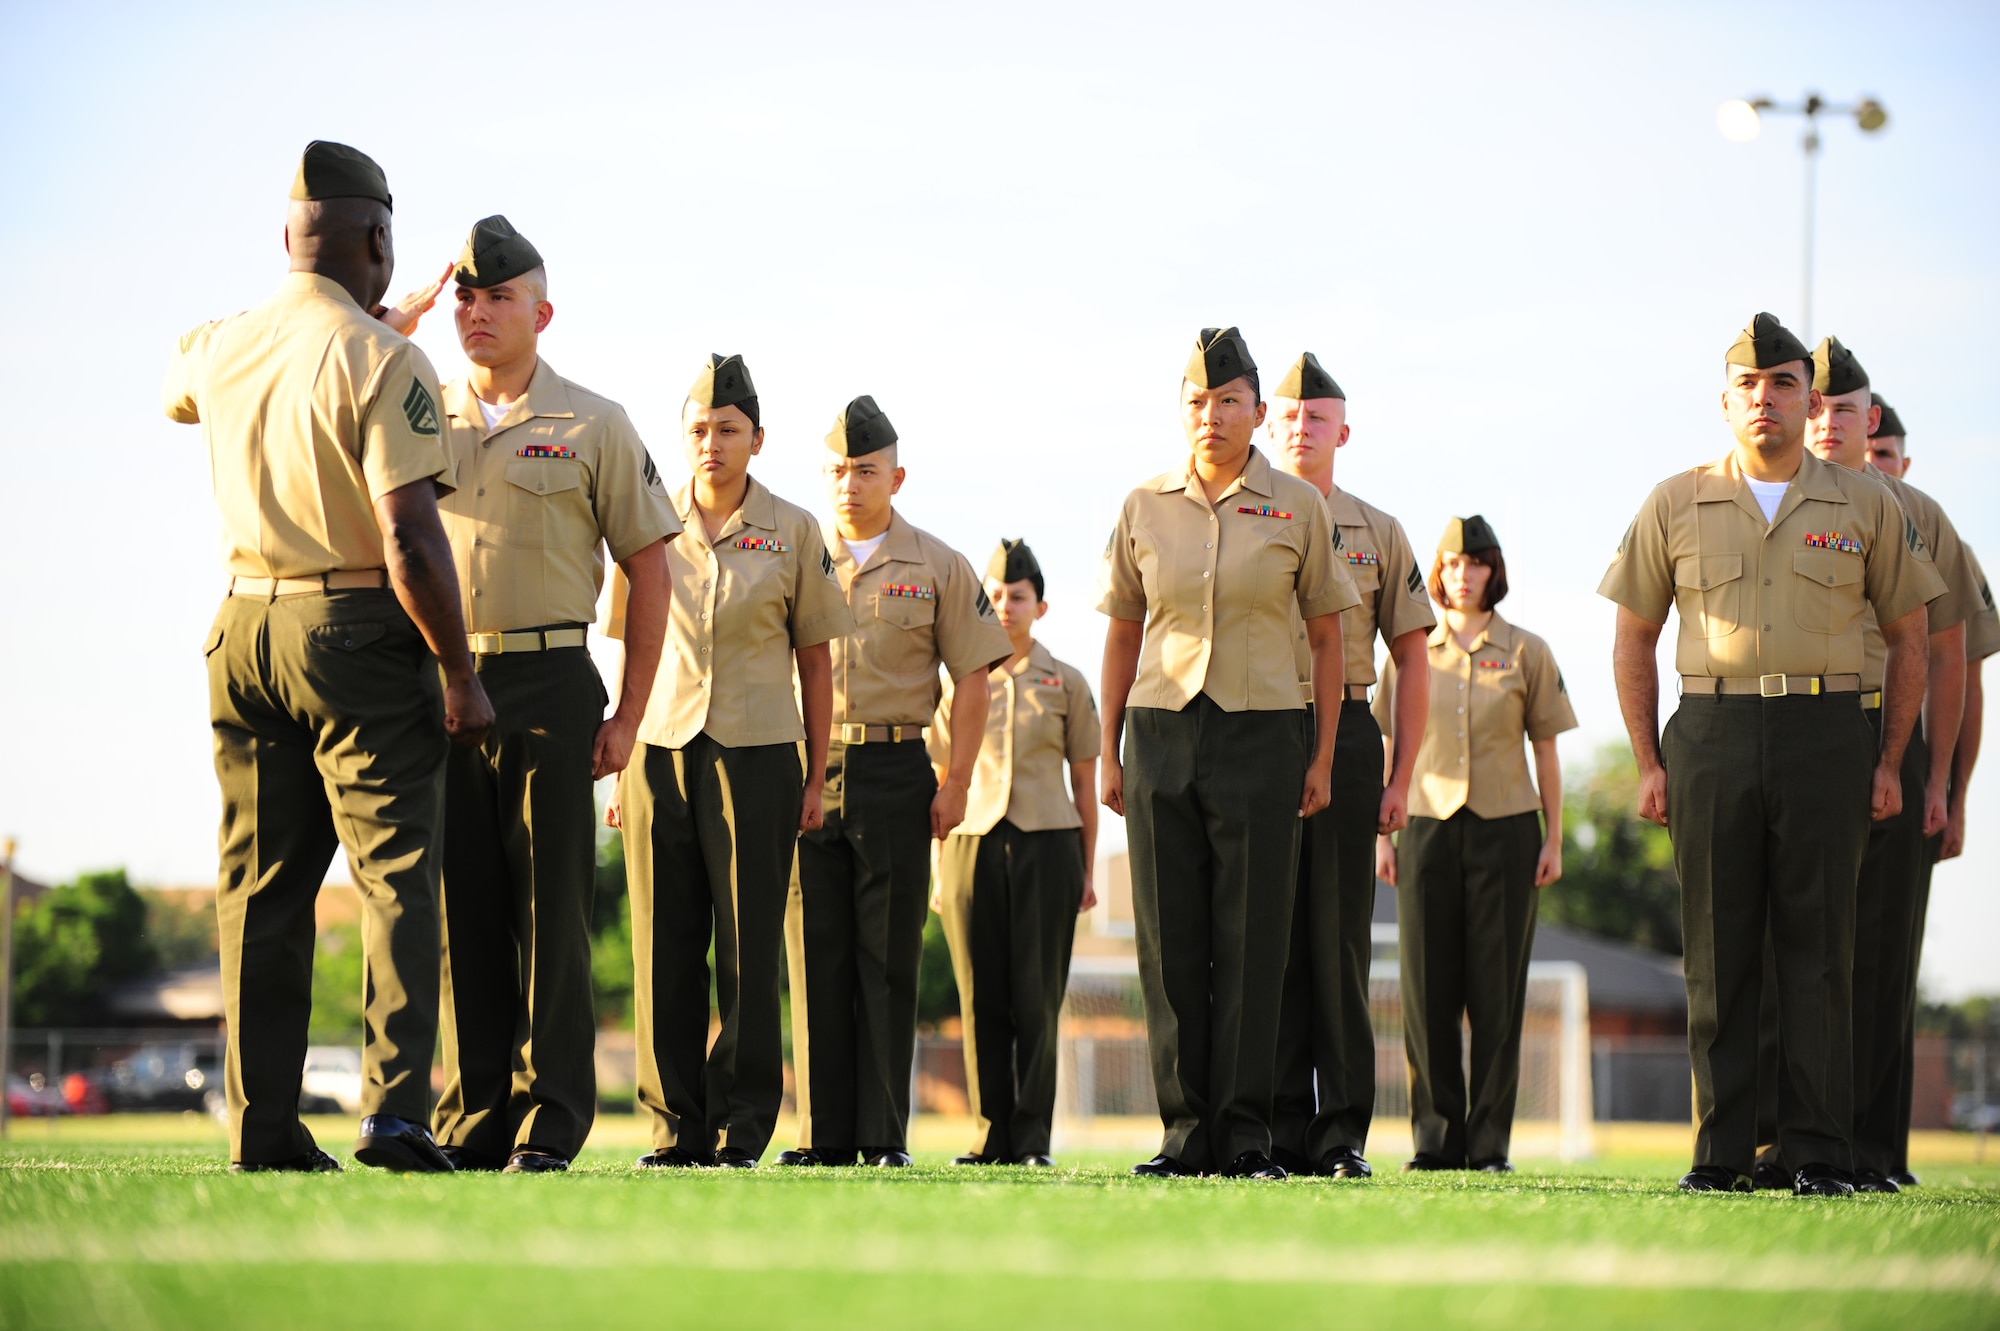 DYESS AIR FORCE BASE, Texas—Marine Staff Sgt. Tommy Tillman instructs a formation of Marine corporals here Aug. 5.Twenty-eight Marine corporals stood in formation on the fitness center football field to be inspected in their uniforms by instructors. The Marine’s Enlisted Professional Military Education course, “Corporals Course”, commenced for the first time at Dyess. The 16-day course teaches young Marine noncommissioned officers (corporals) how to lead in today’s Marine Corps in garrison and in theater. (U.S. Air Force photo/ Senior Airman Domonique Washington) 